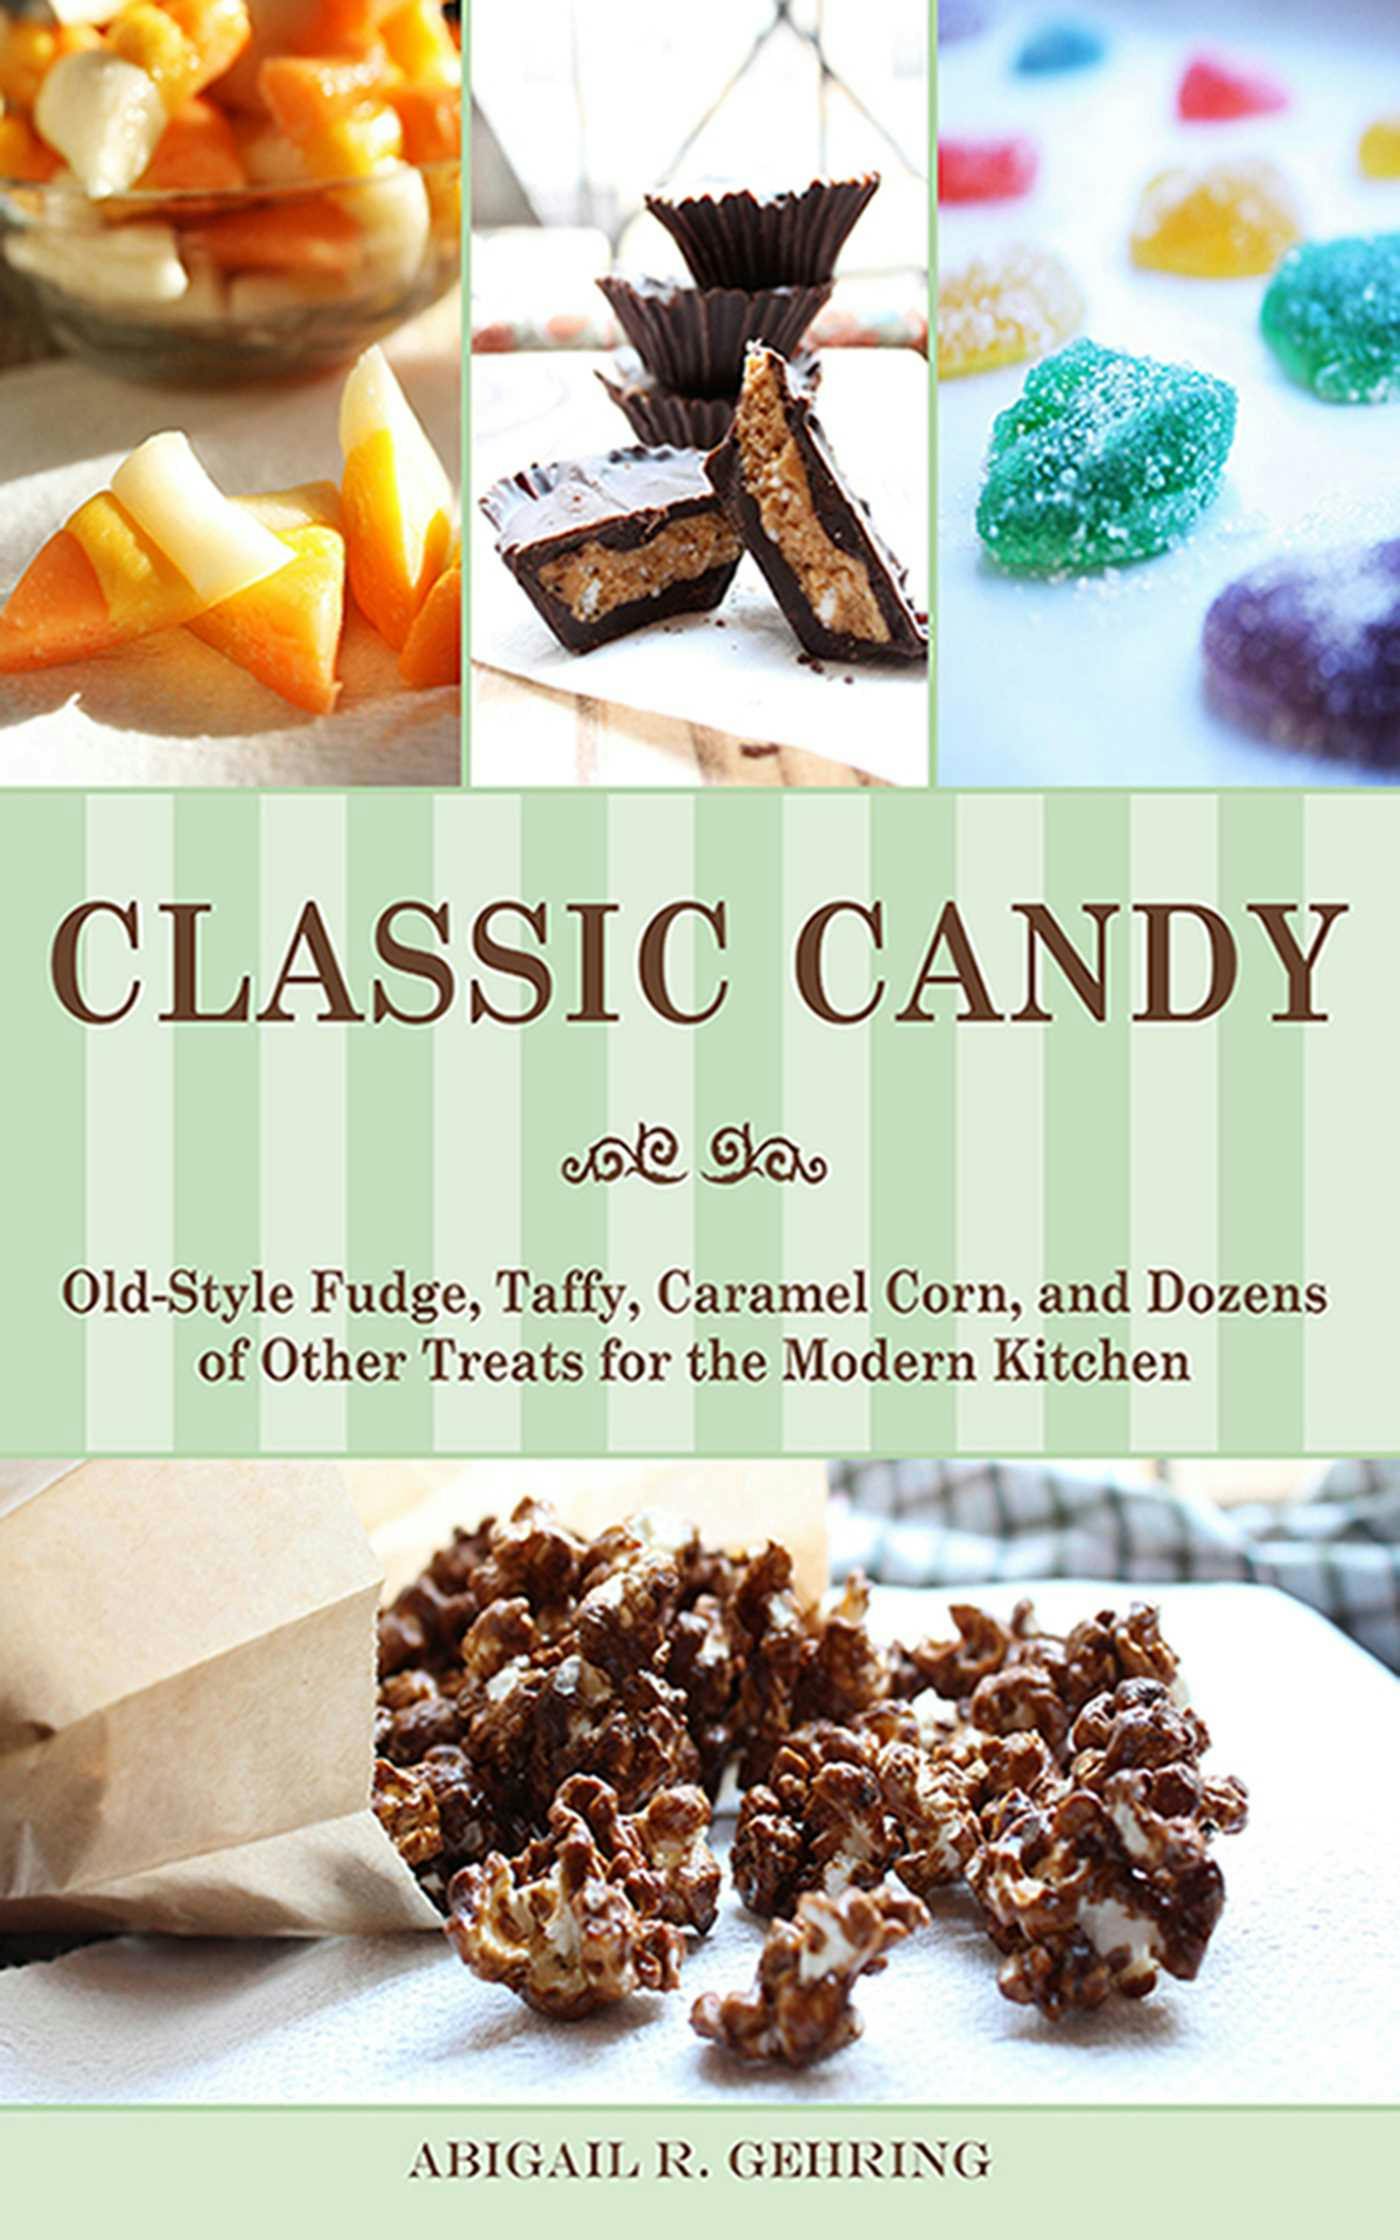 Classic Candy: Old-Style Fudge, Taffy, Caramel Corn, and Dozens of Other Treats for the Modern Kitchen - Abigail Gehring